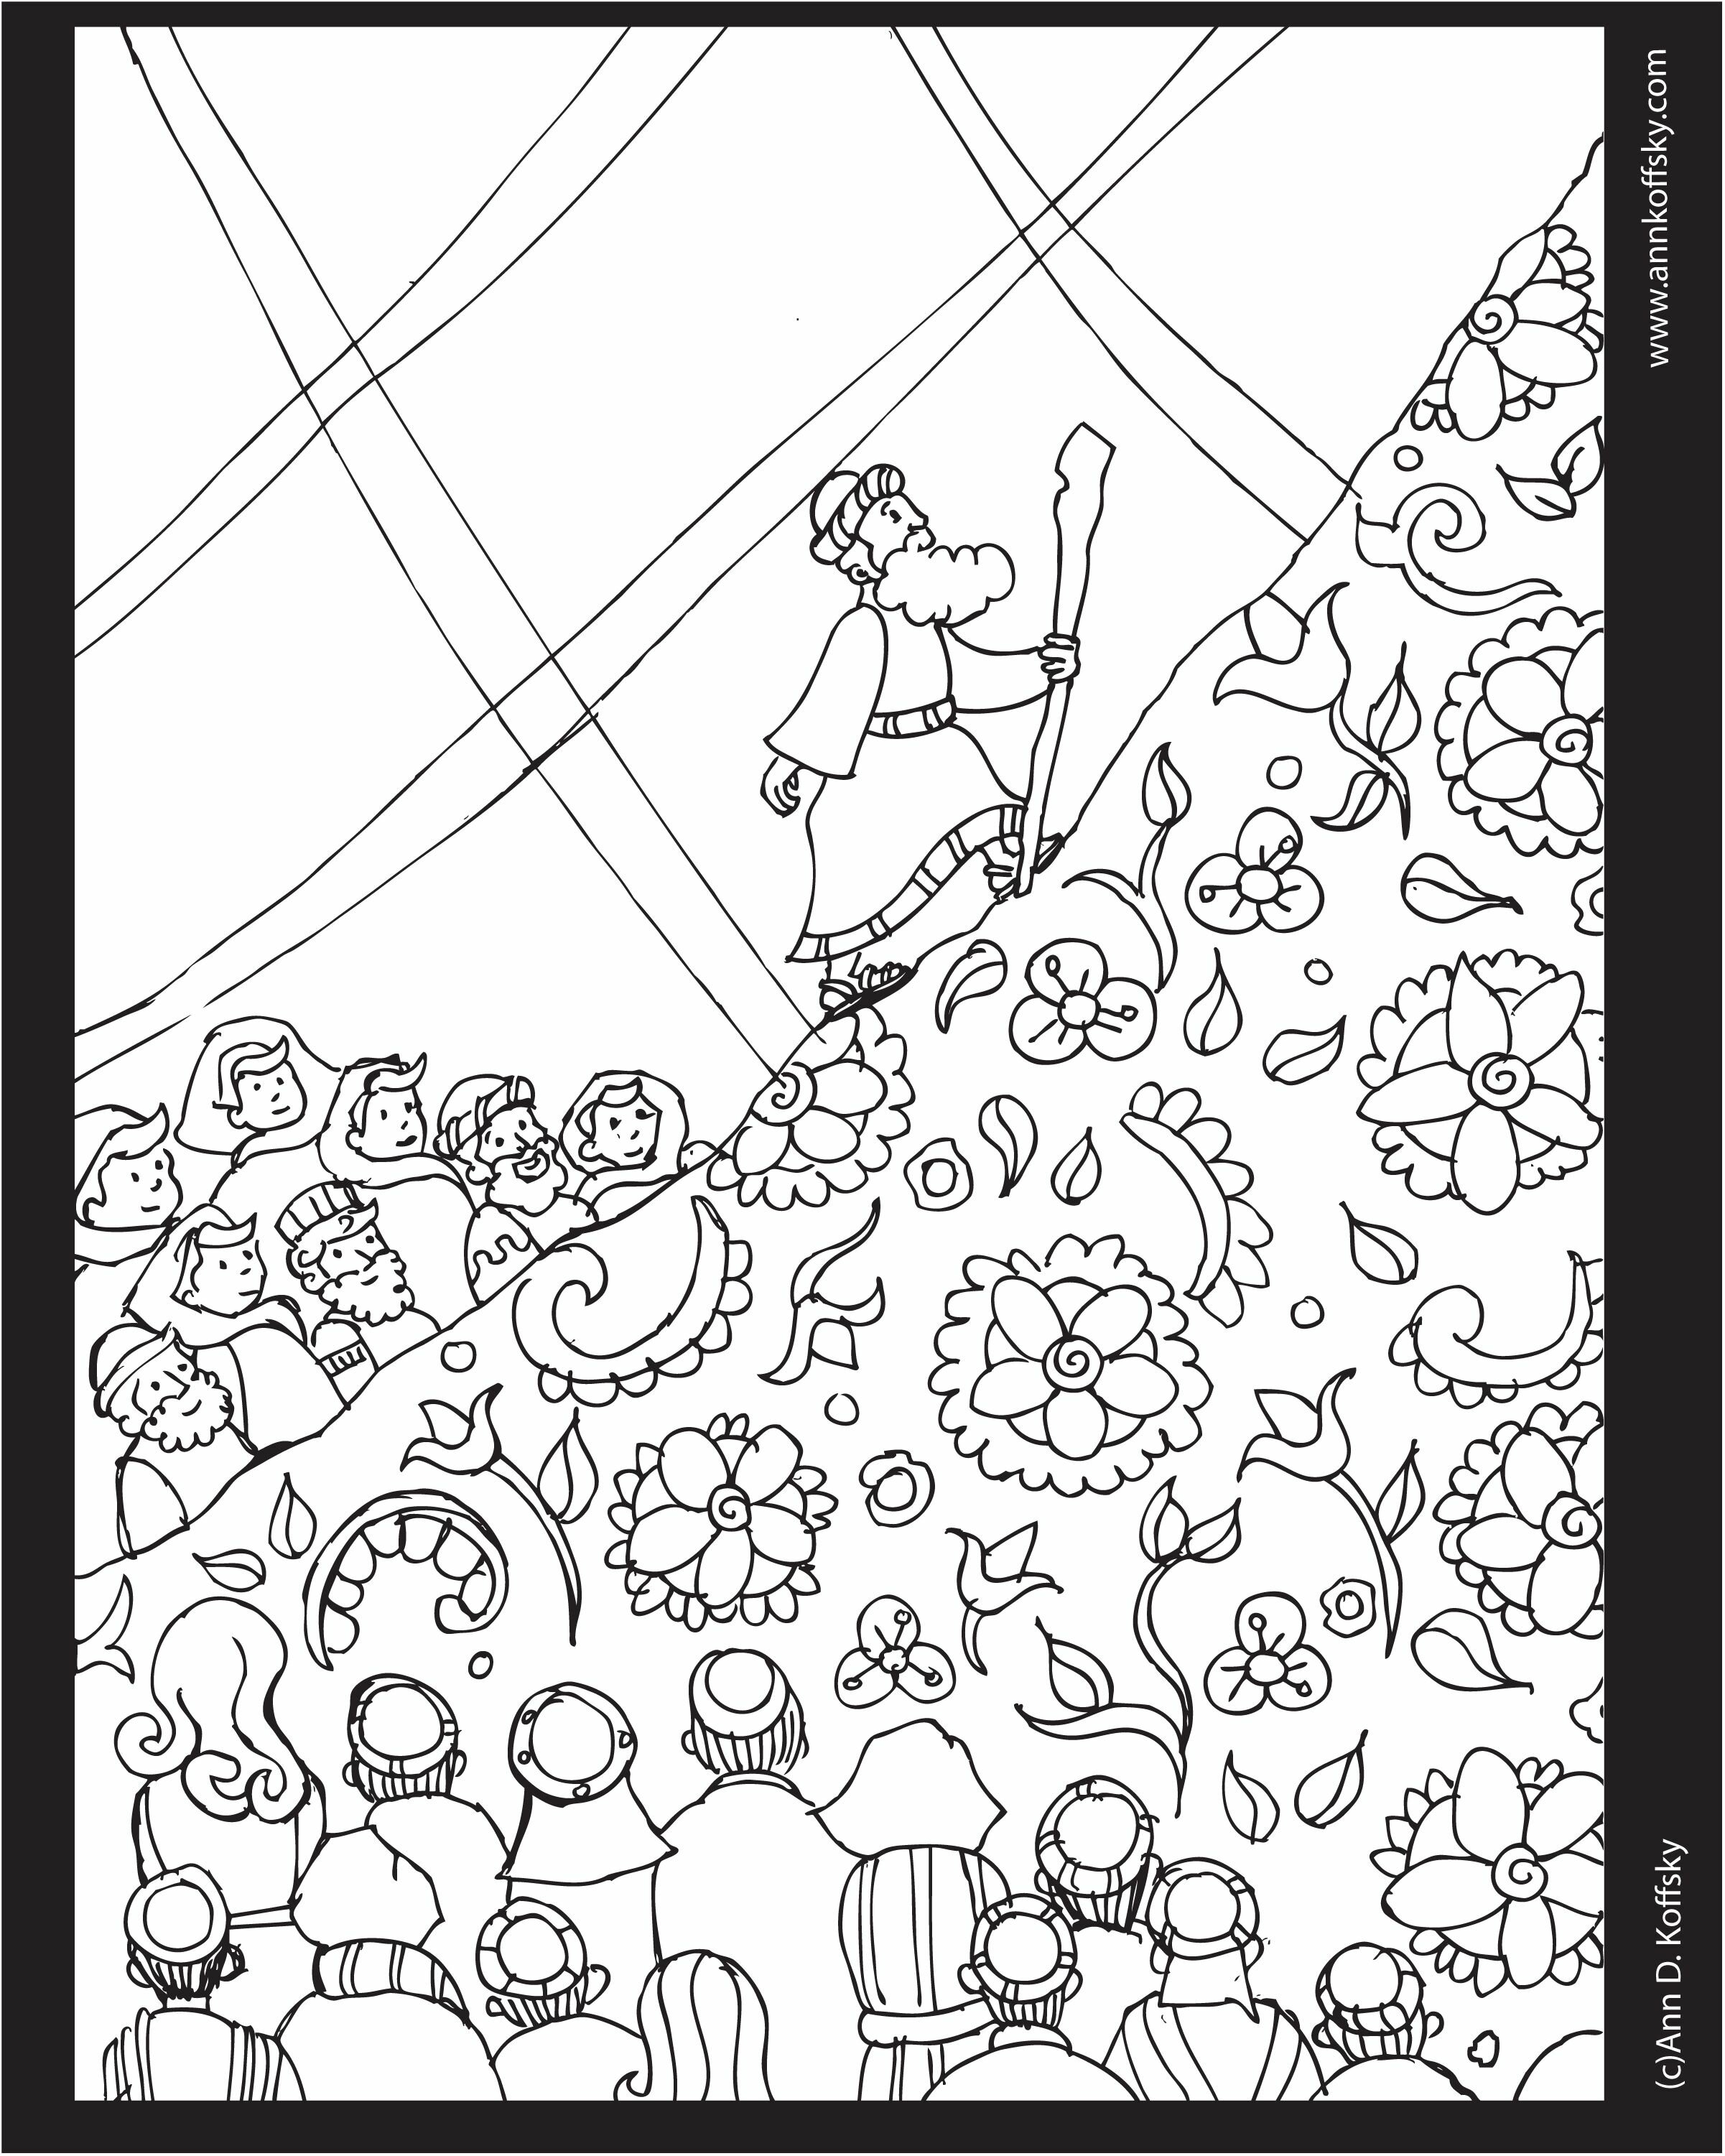 great shavuot jewish holiday coloring page free printable jewish coloring pages 